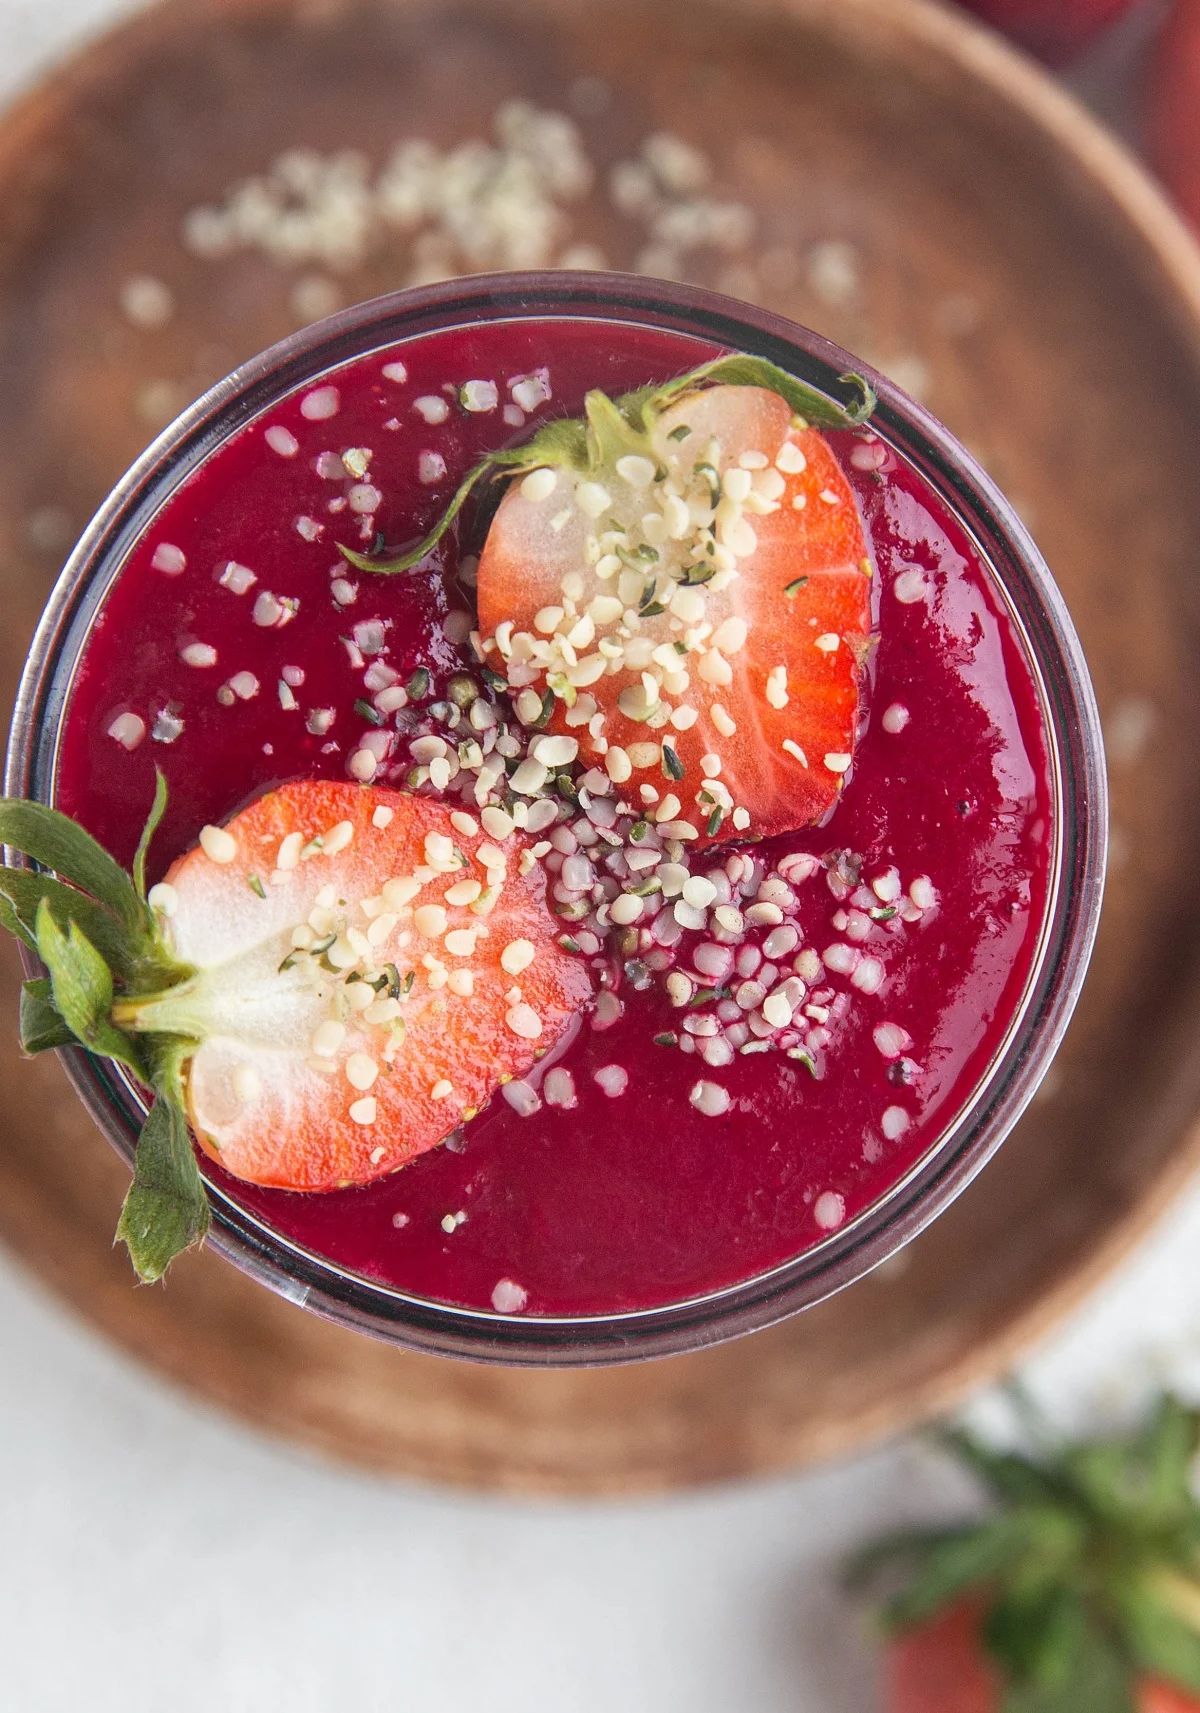 Anti-Inflammatory Smoothie with beets, turmeric, ginger, and strawberries